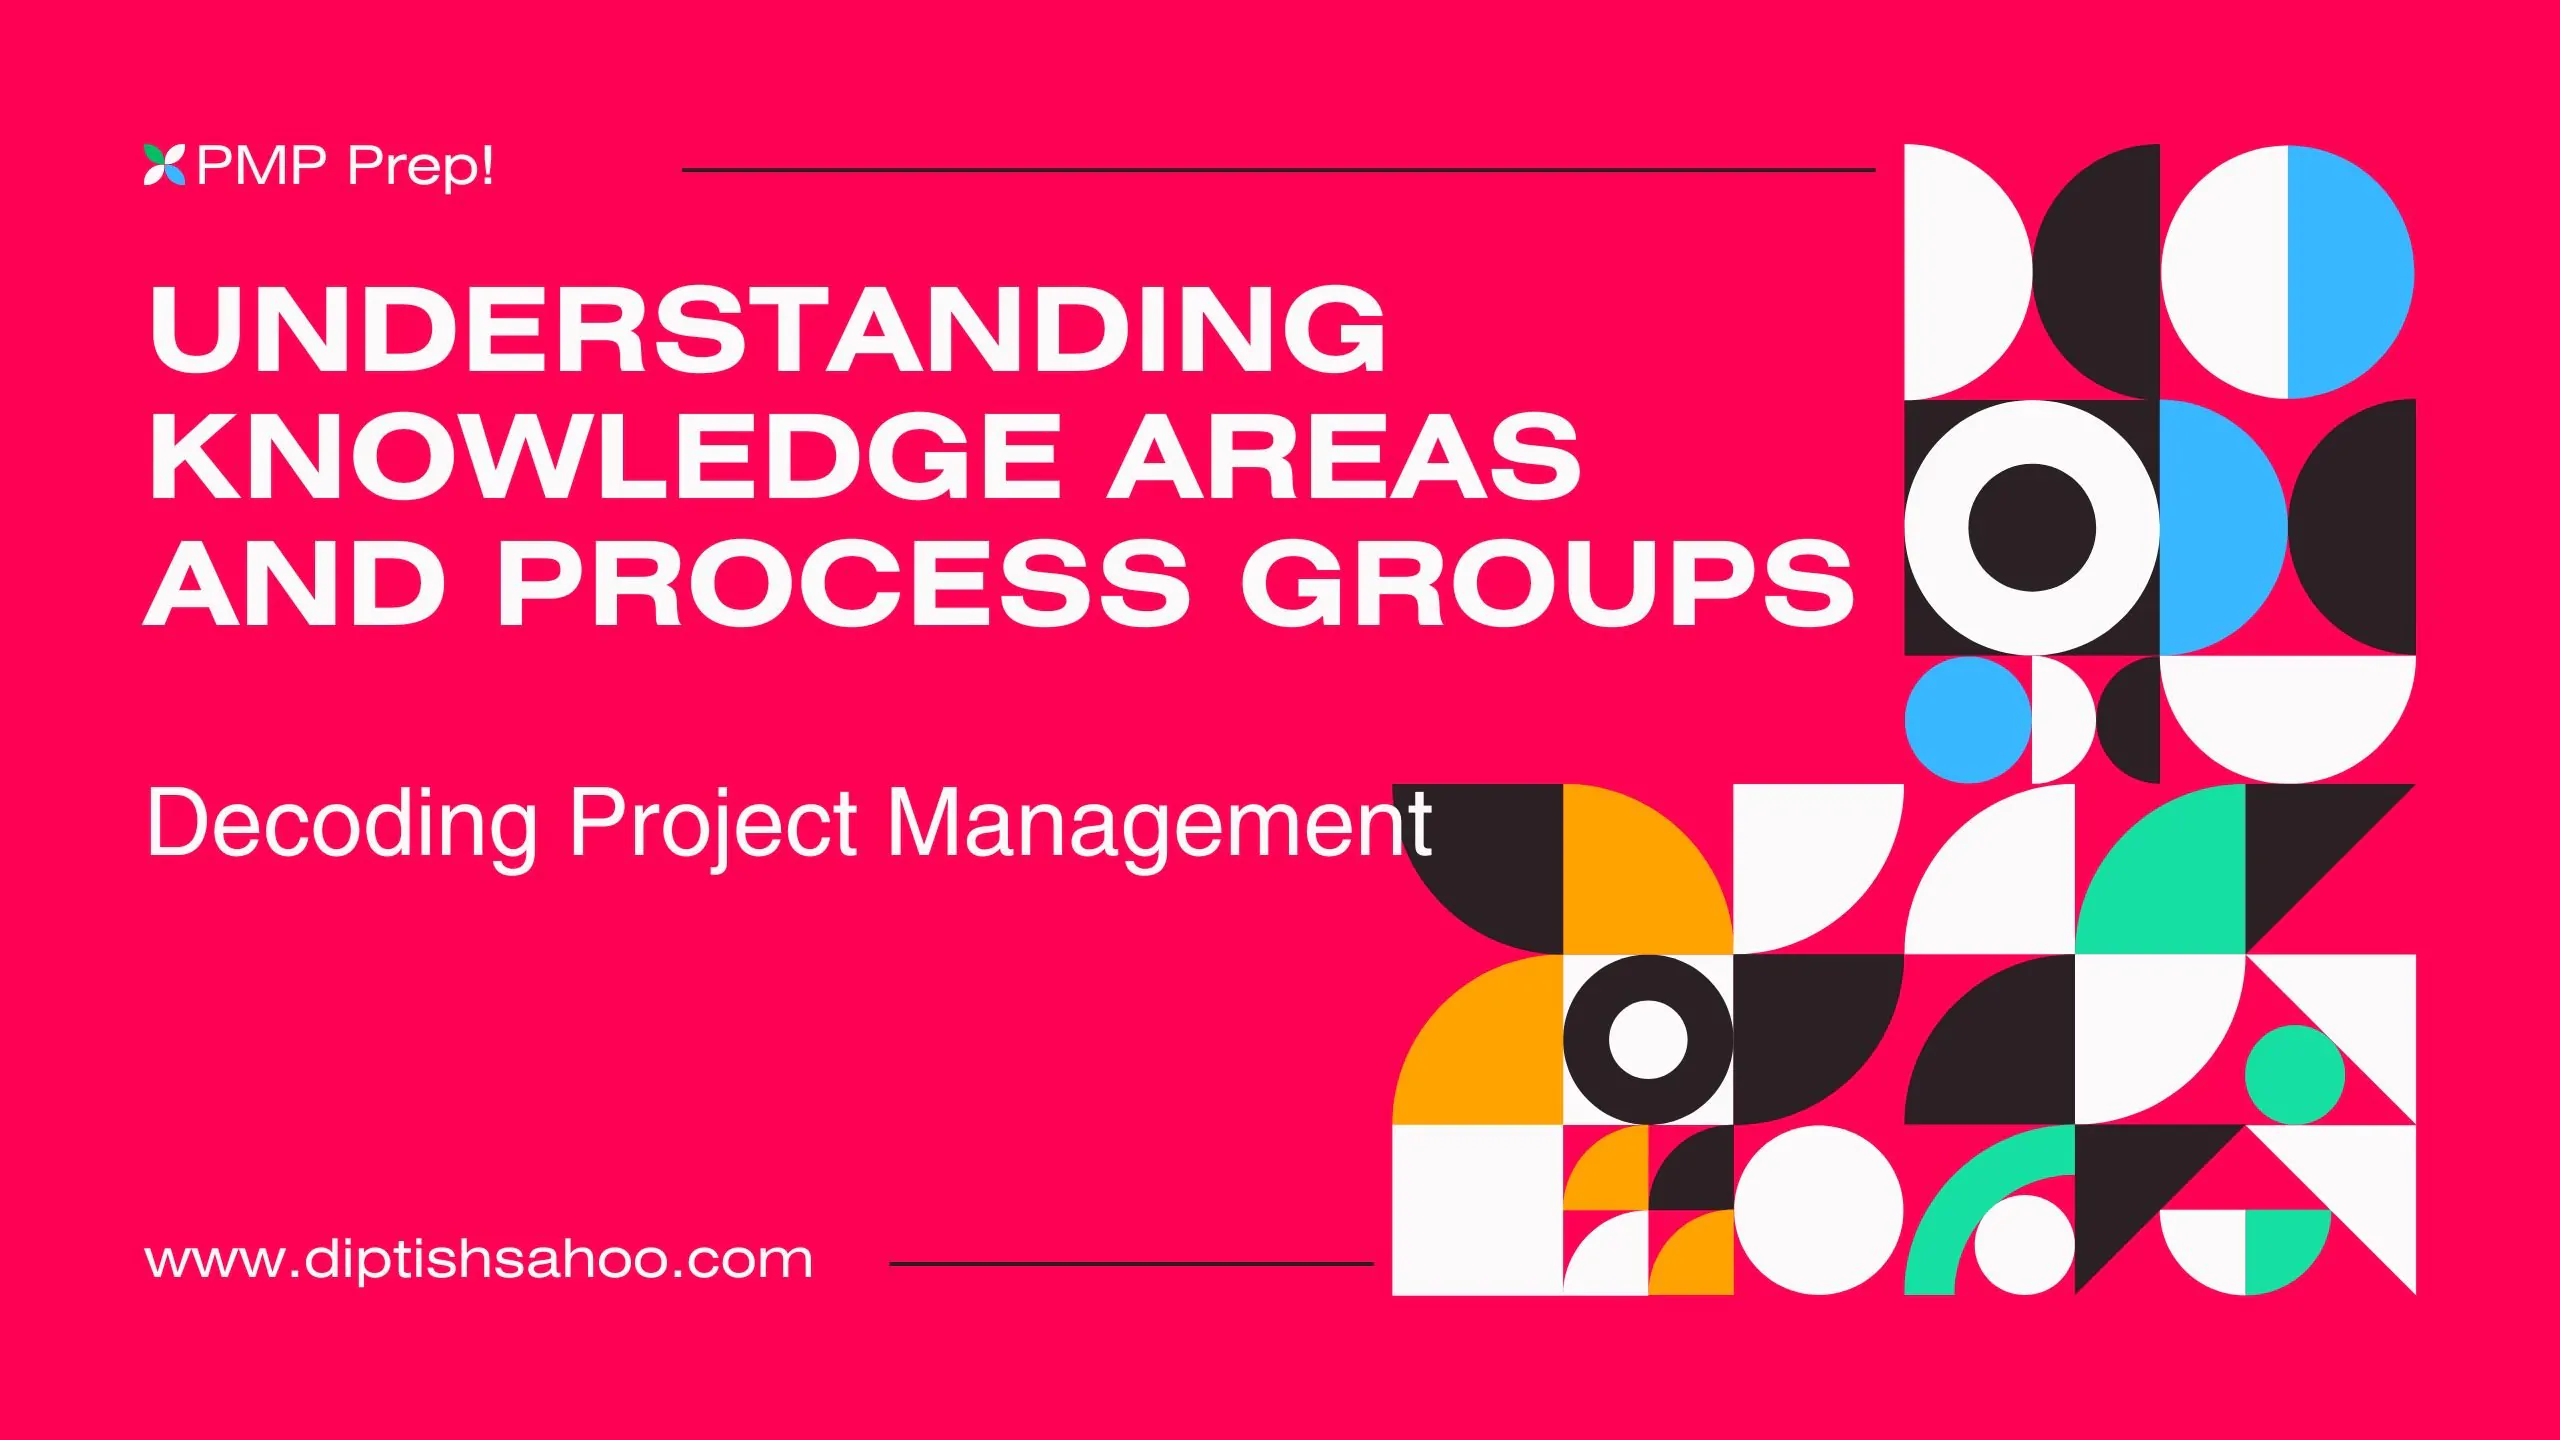 Decoding Project Management: Understanding Knowledge Areas & Process Groups